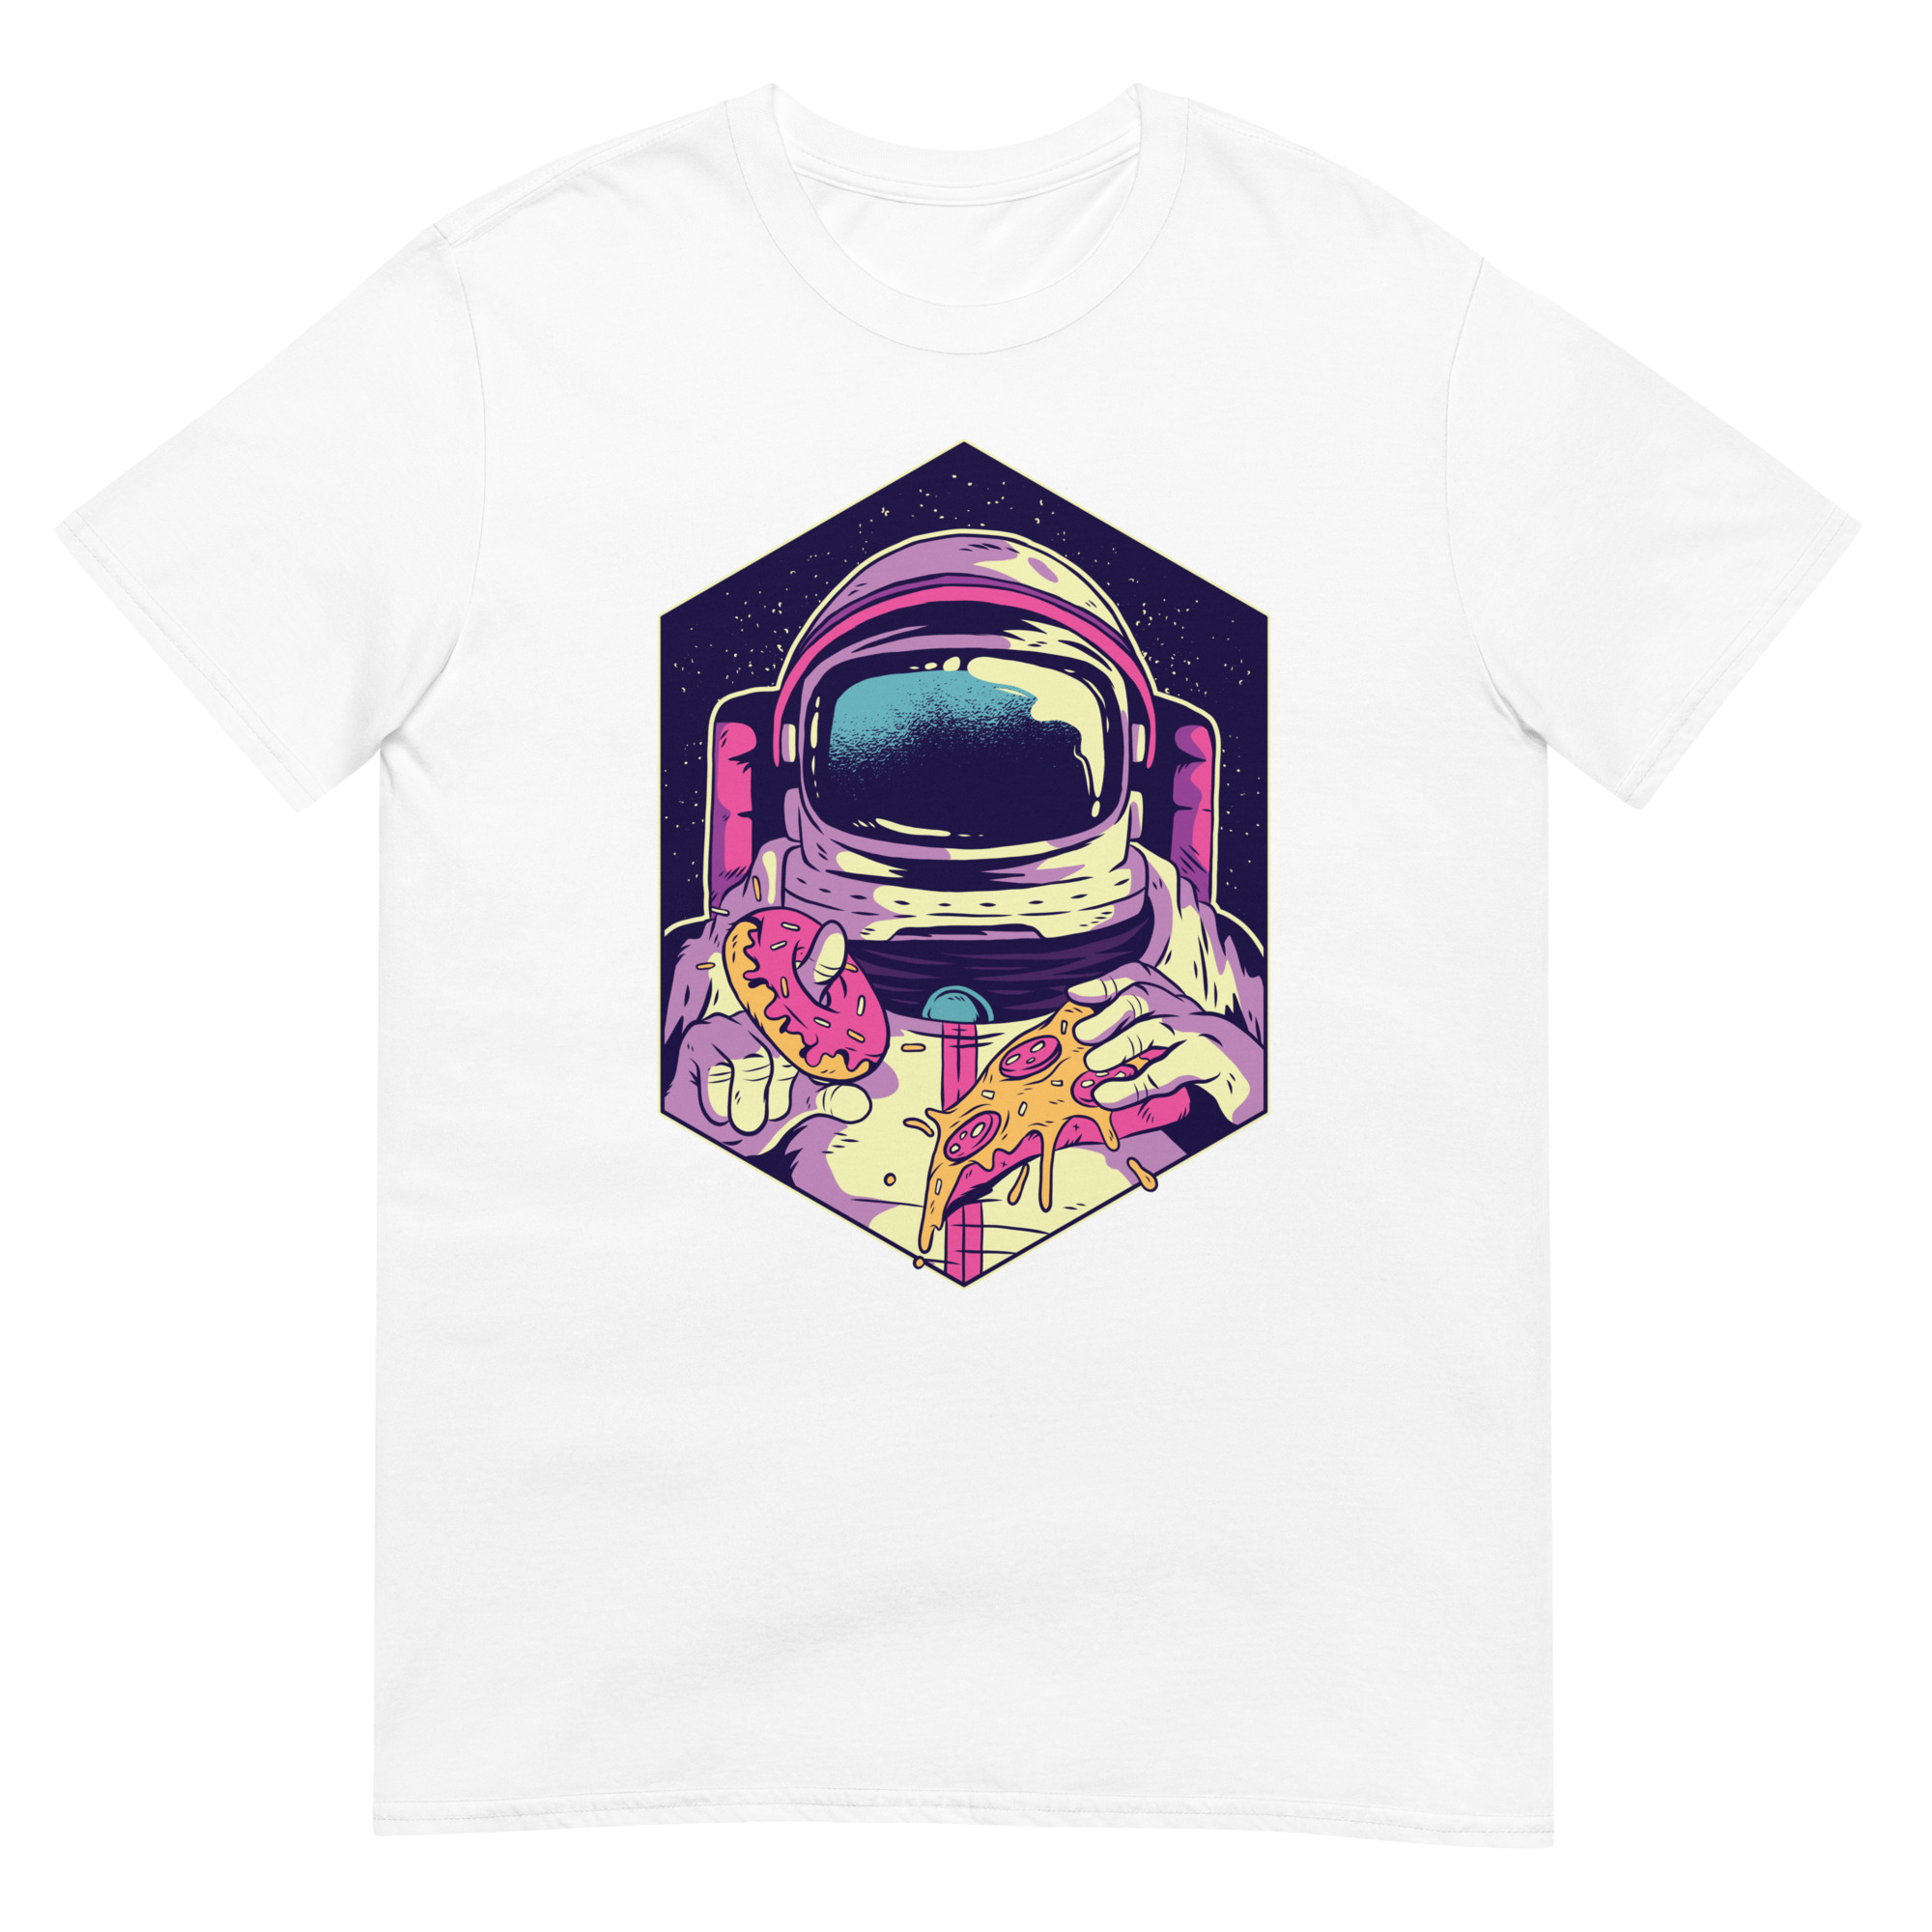 Astronaut Eating Donut And Pizza - Unisex Donut T-Shirt